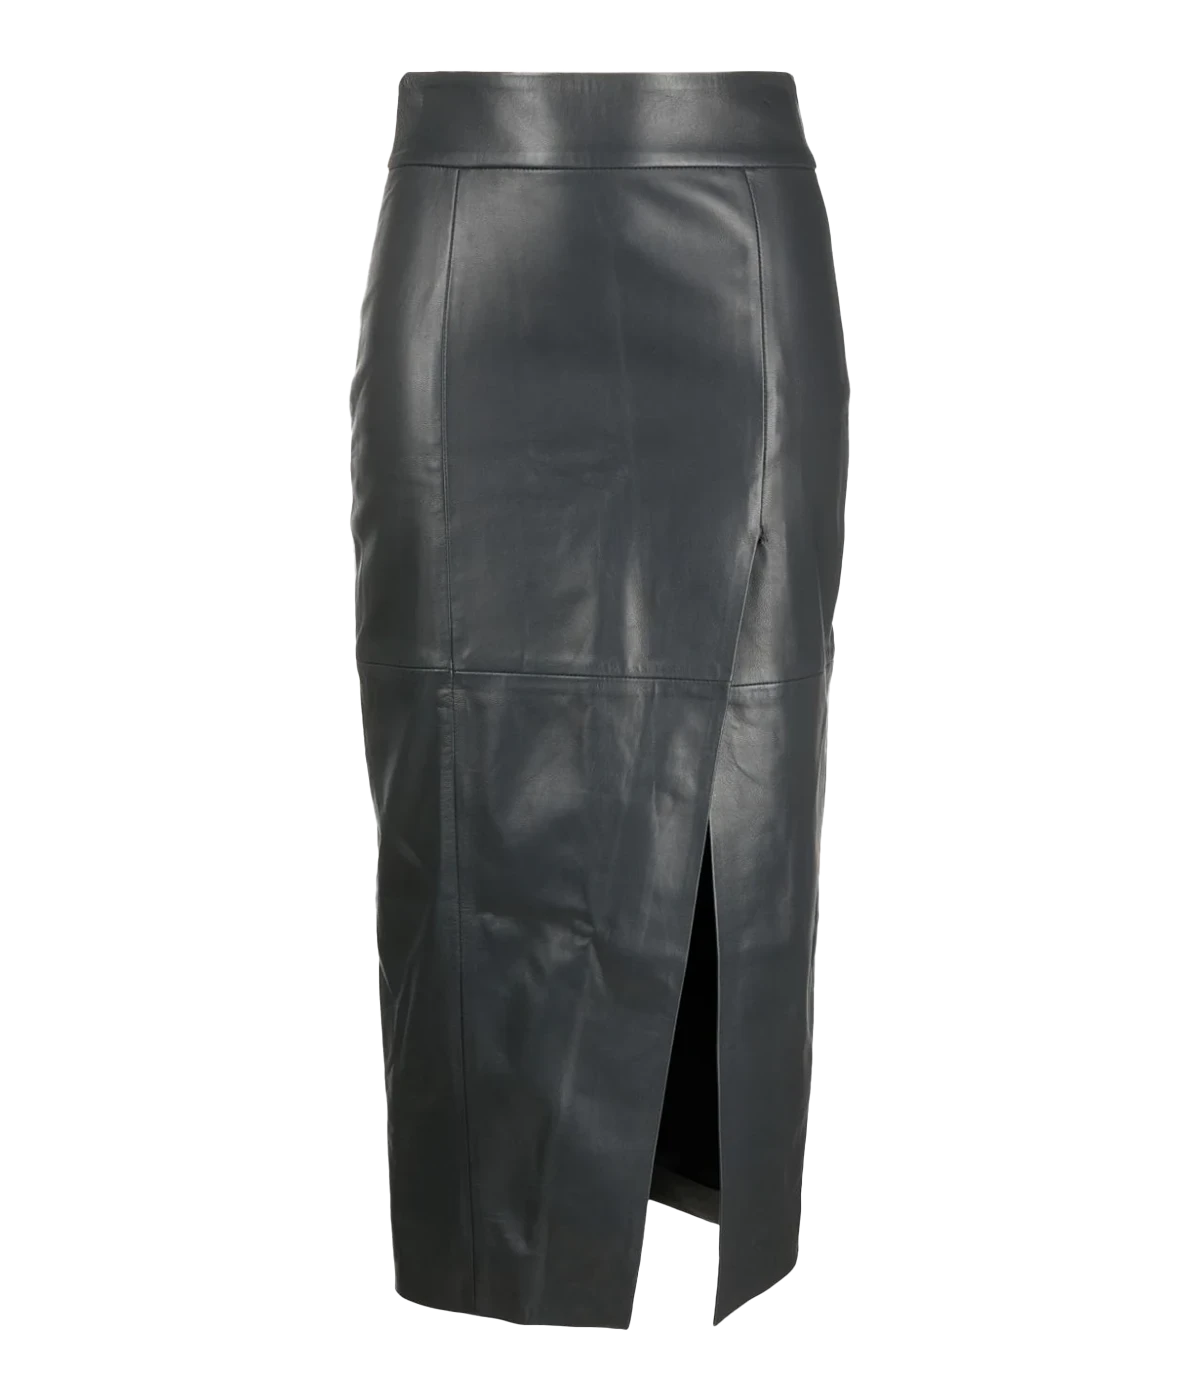 A midi length 100% leather skirt, in a grey colourway, featuring a tonal stitching, high waist, straight hemline and front split. Comfortable, work wear, date night skirt, timeless, made internationally. 